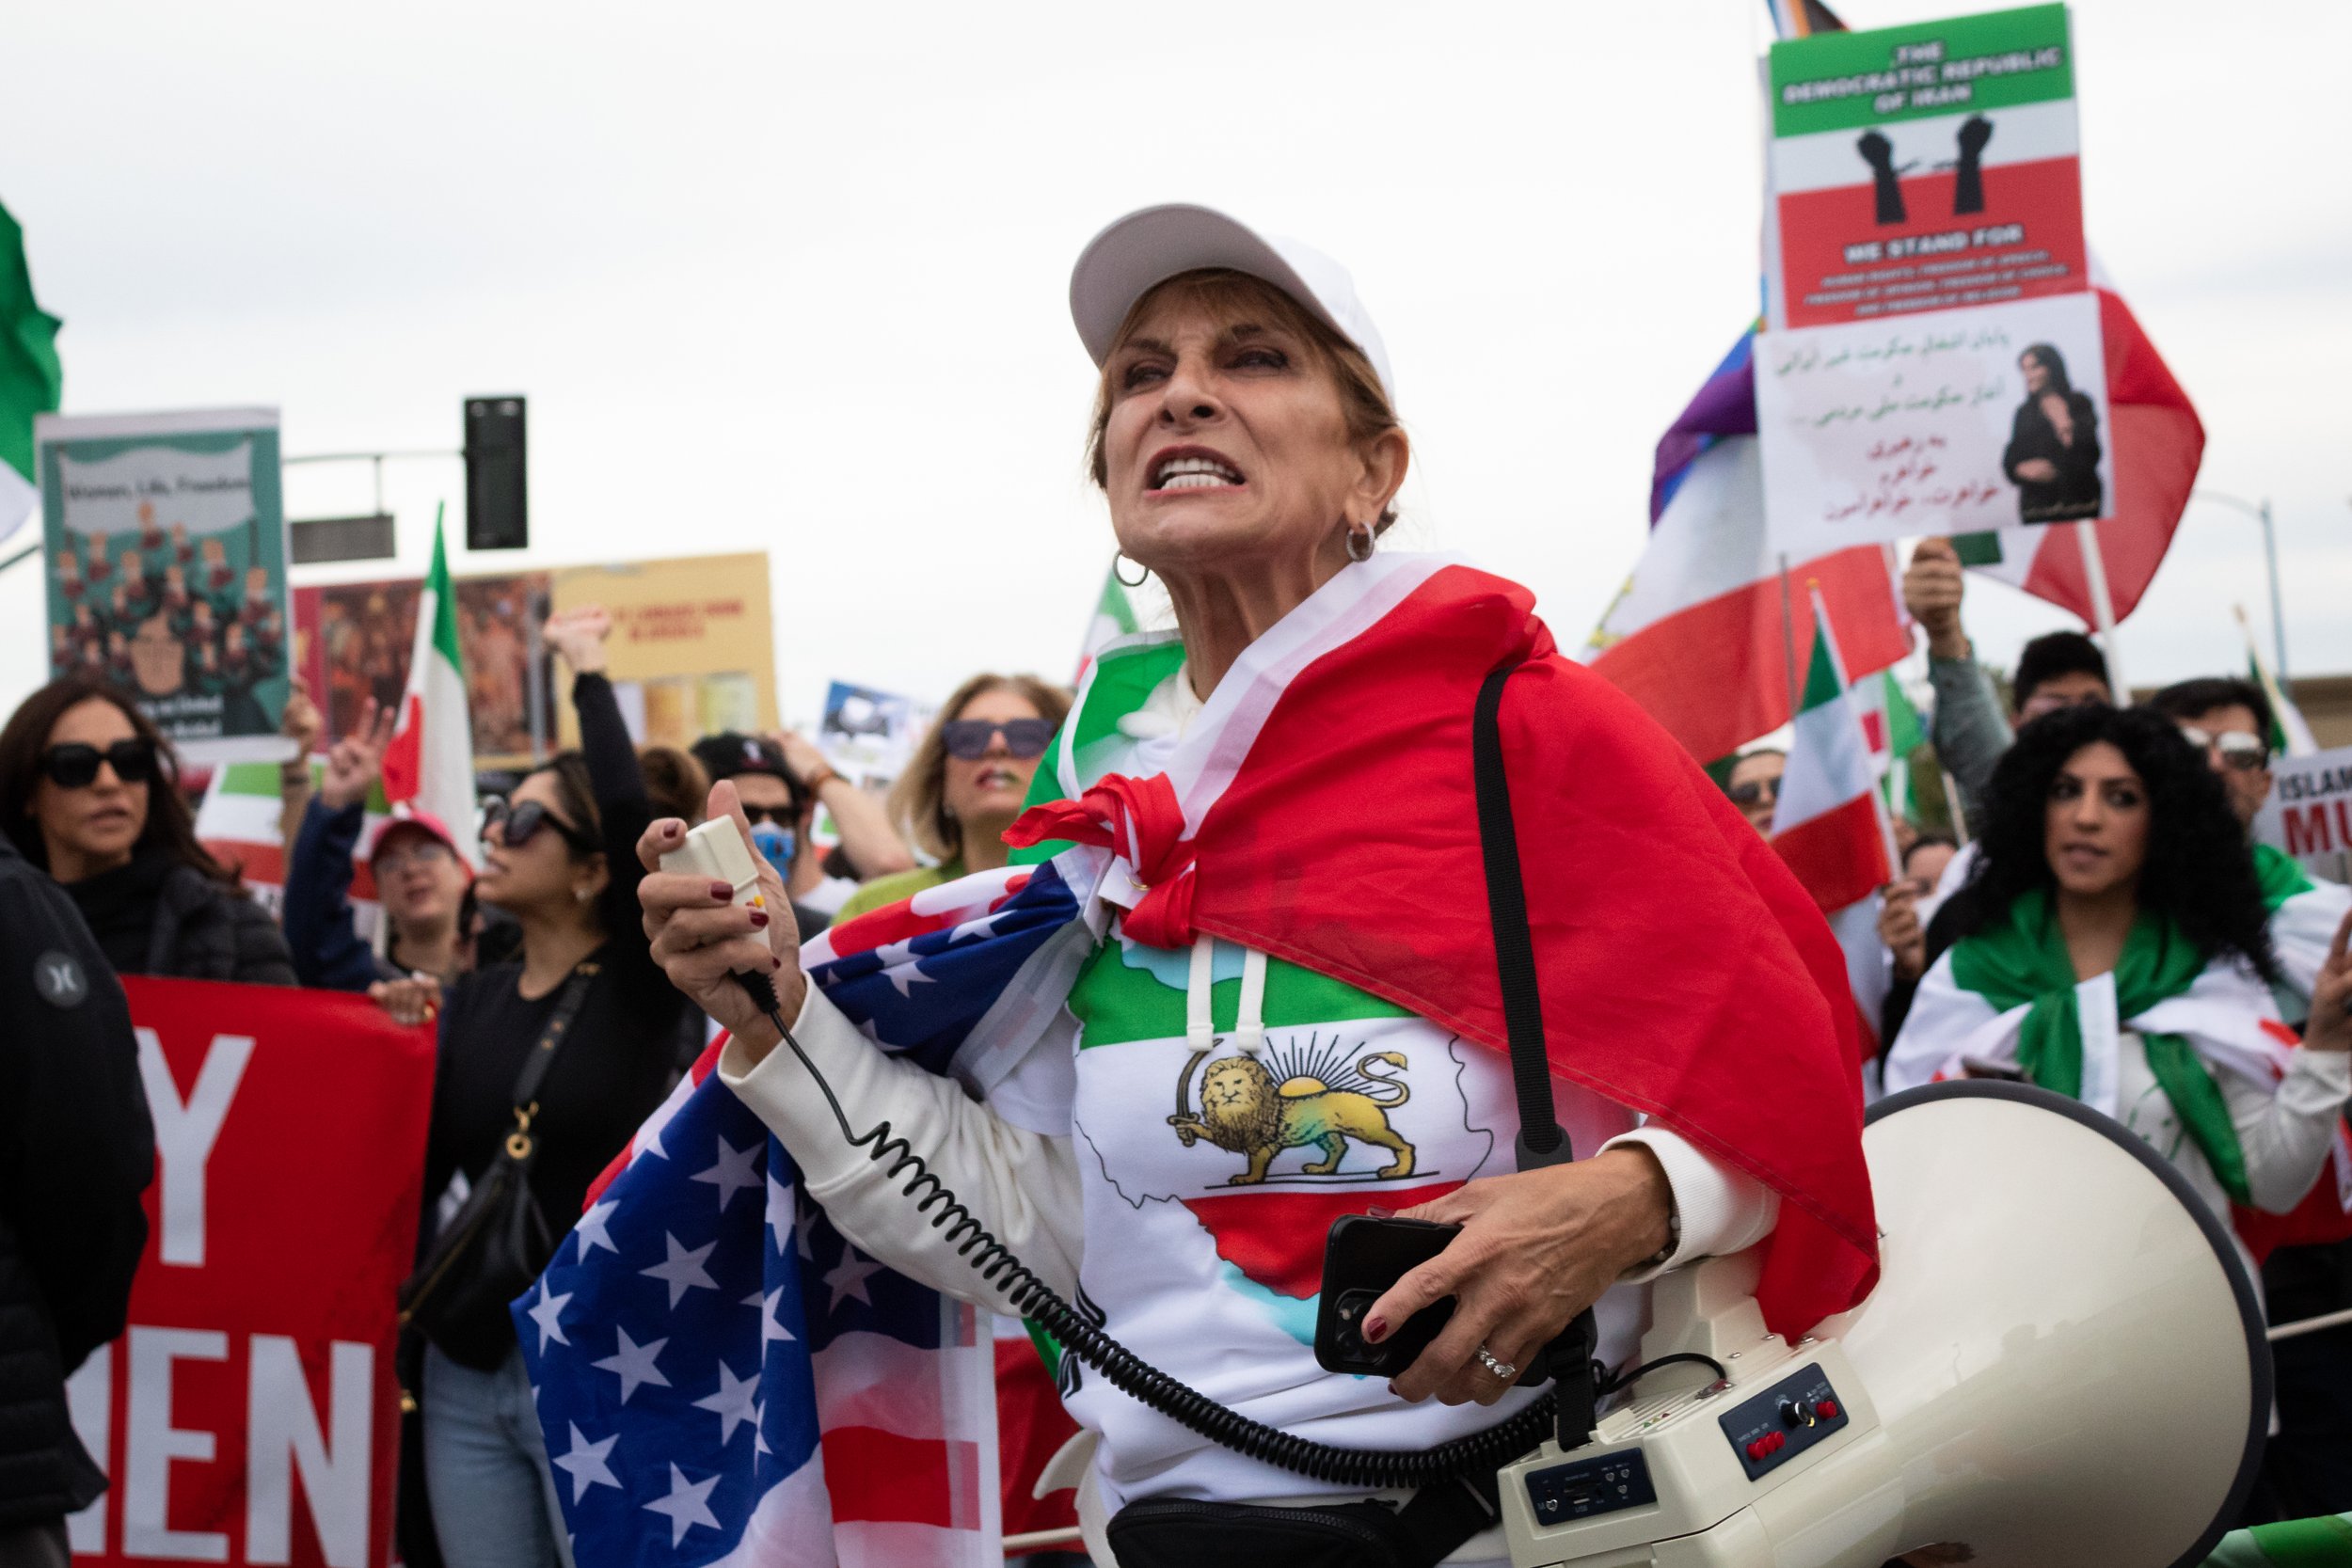  A demonstrator leading chants during the Freedom for Iran rally in Los Angeles, Calif. on Saturday, Dec. 17, 2022. 